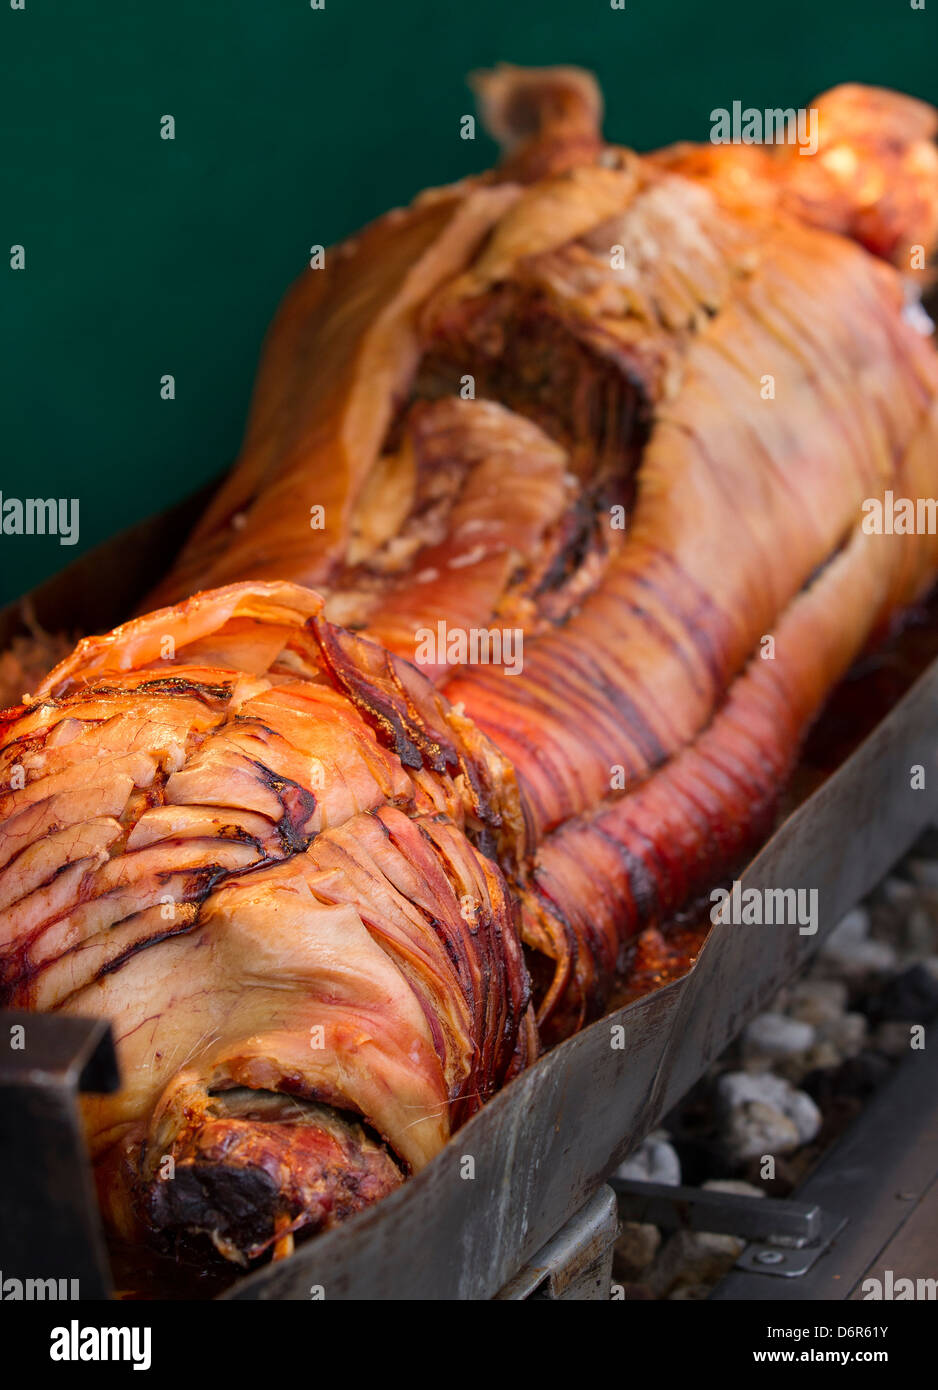 Barbecue of Roast pork. Roasting 'Pig Pickin' pig meats cooking on a rotisserie unit, Food Festival in Manchester, UK Stock Photo